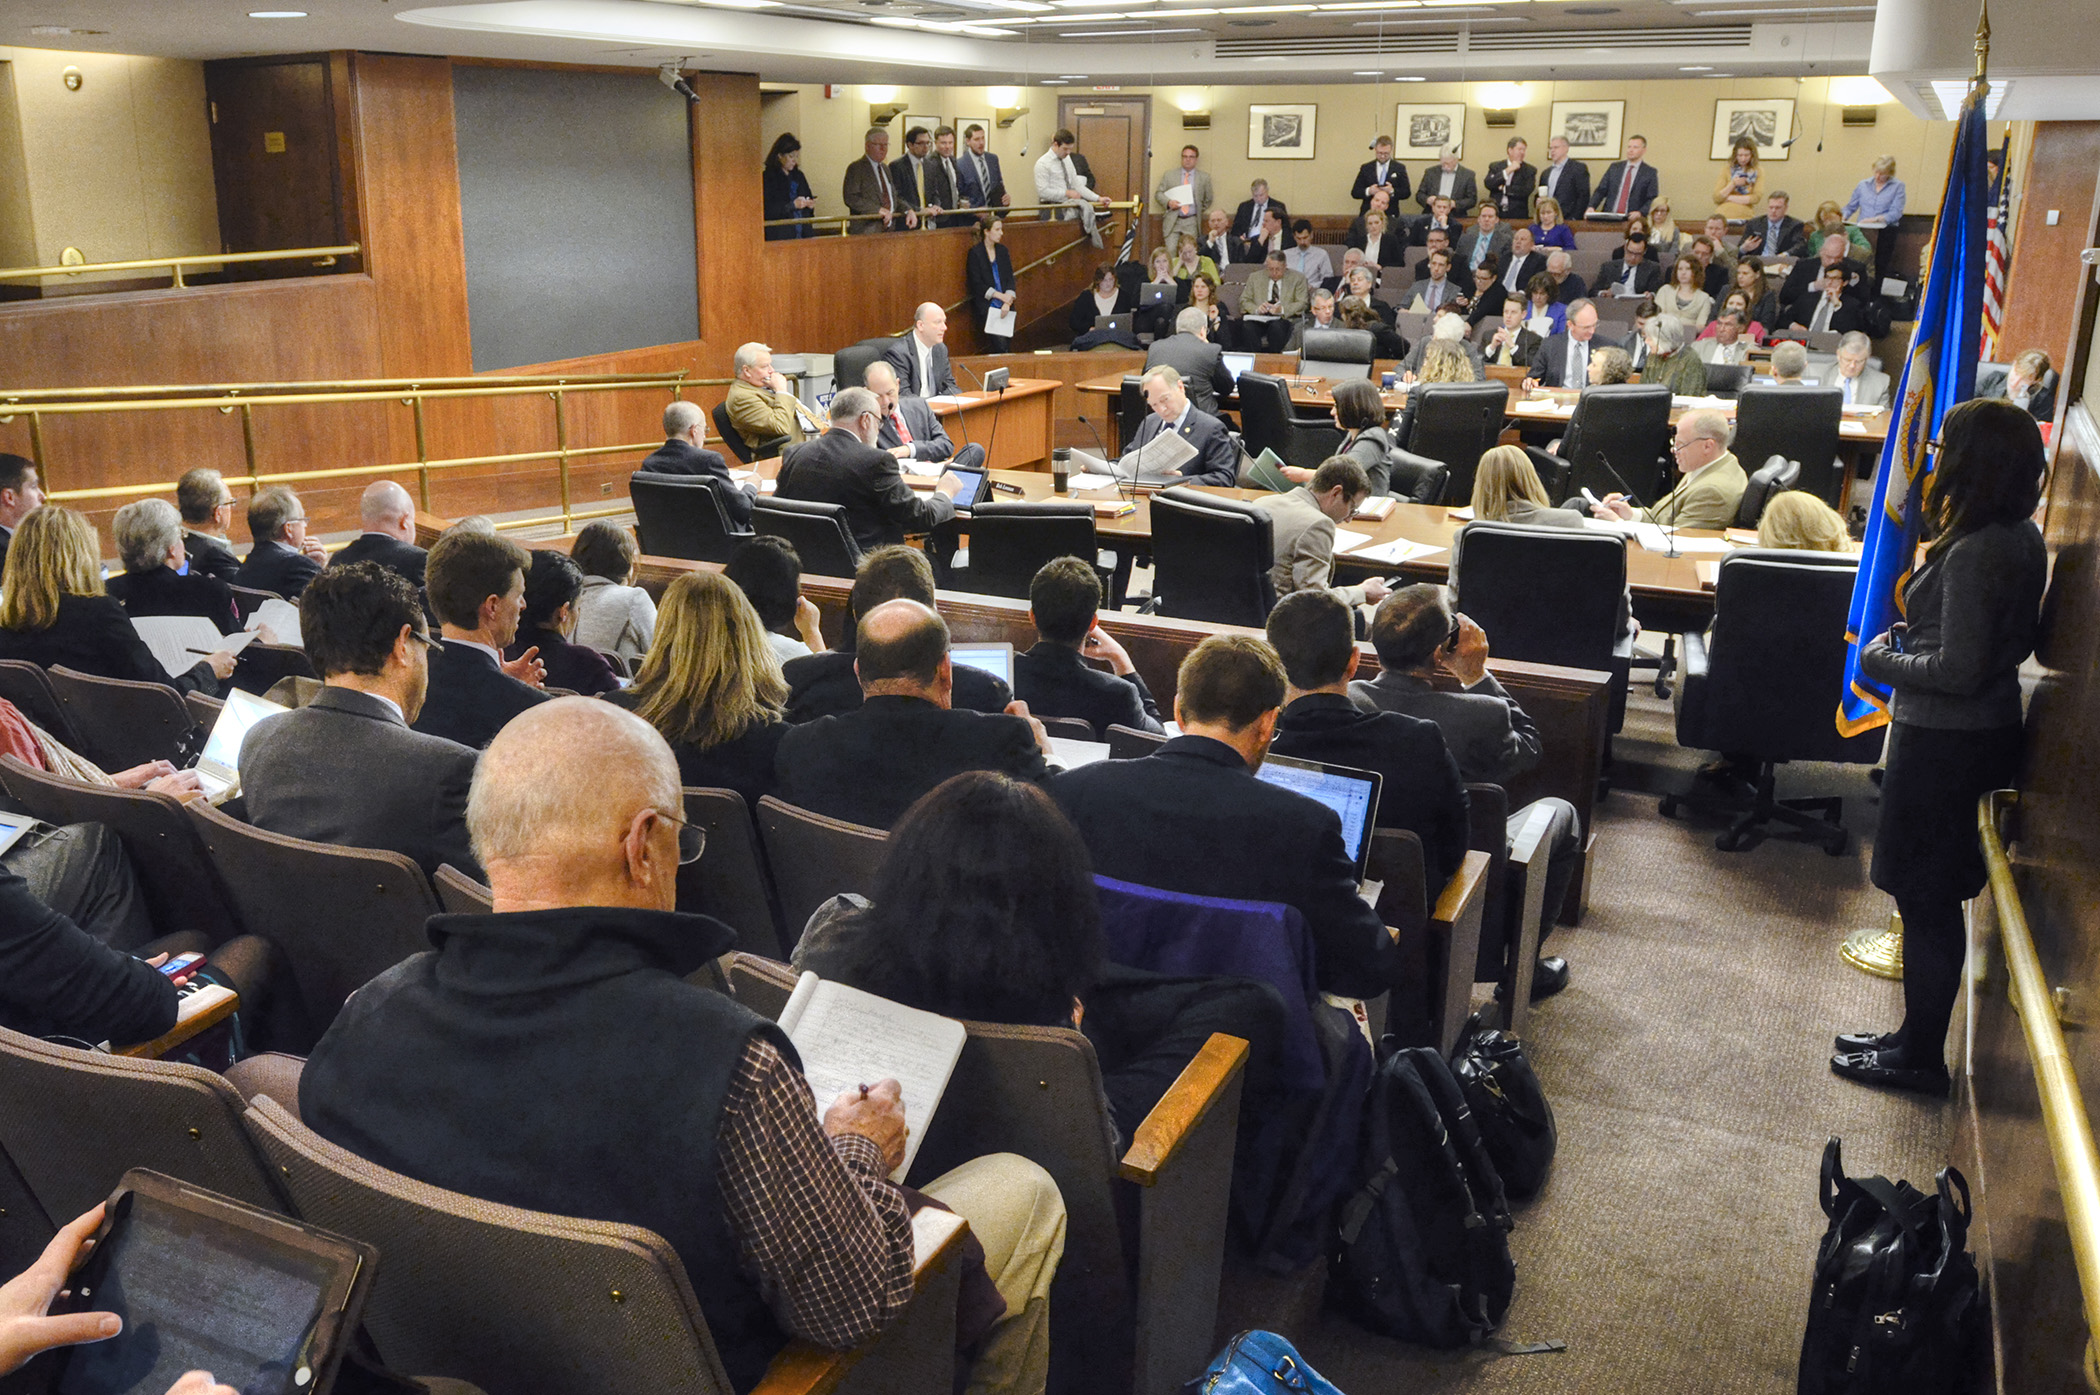 There was a packed hearing room during public testimony on the omnibus job growth and energy affordability bill April 9. Photo by Andrew VonBank